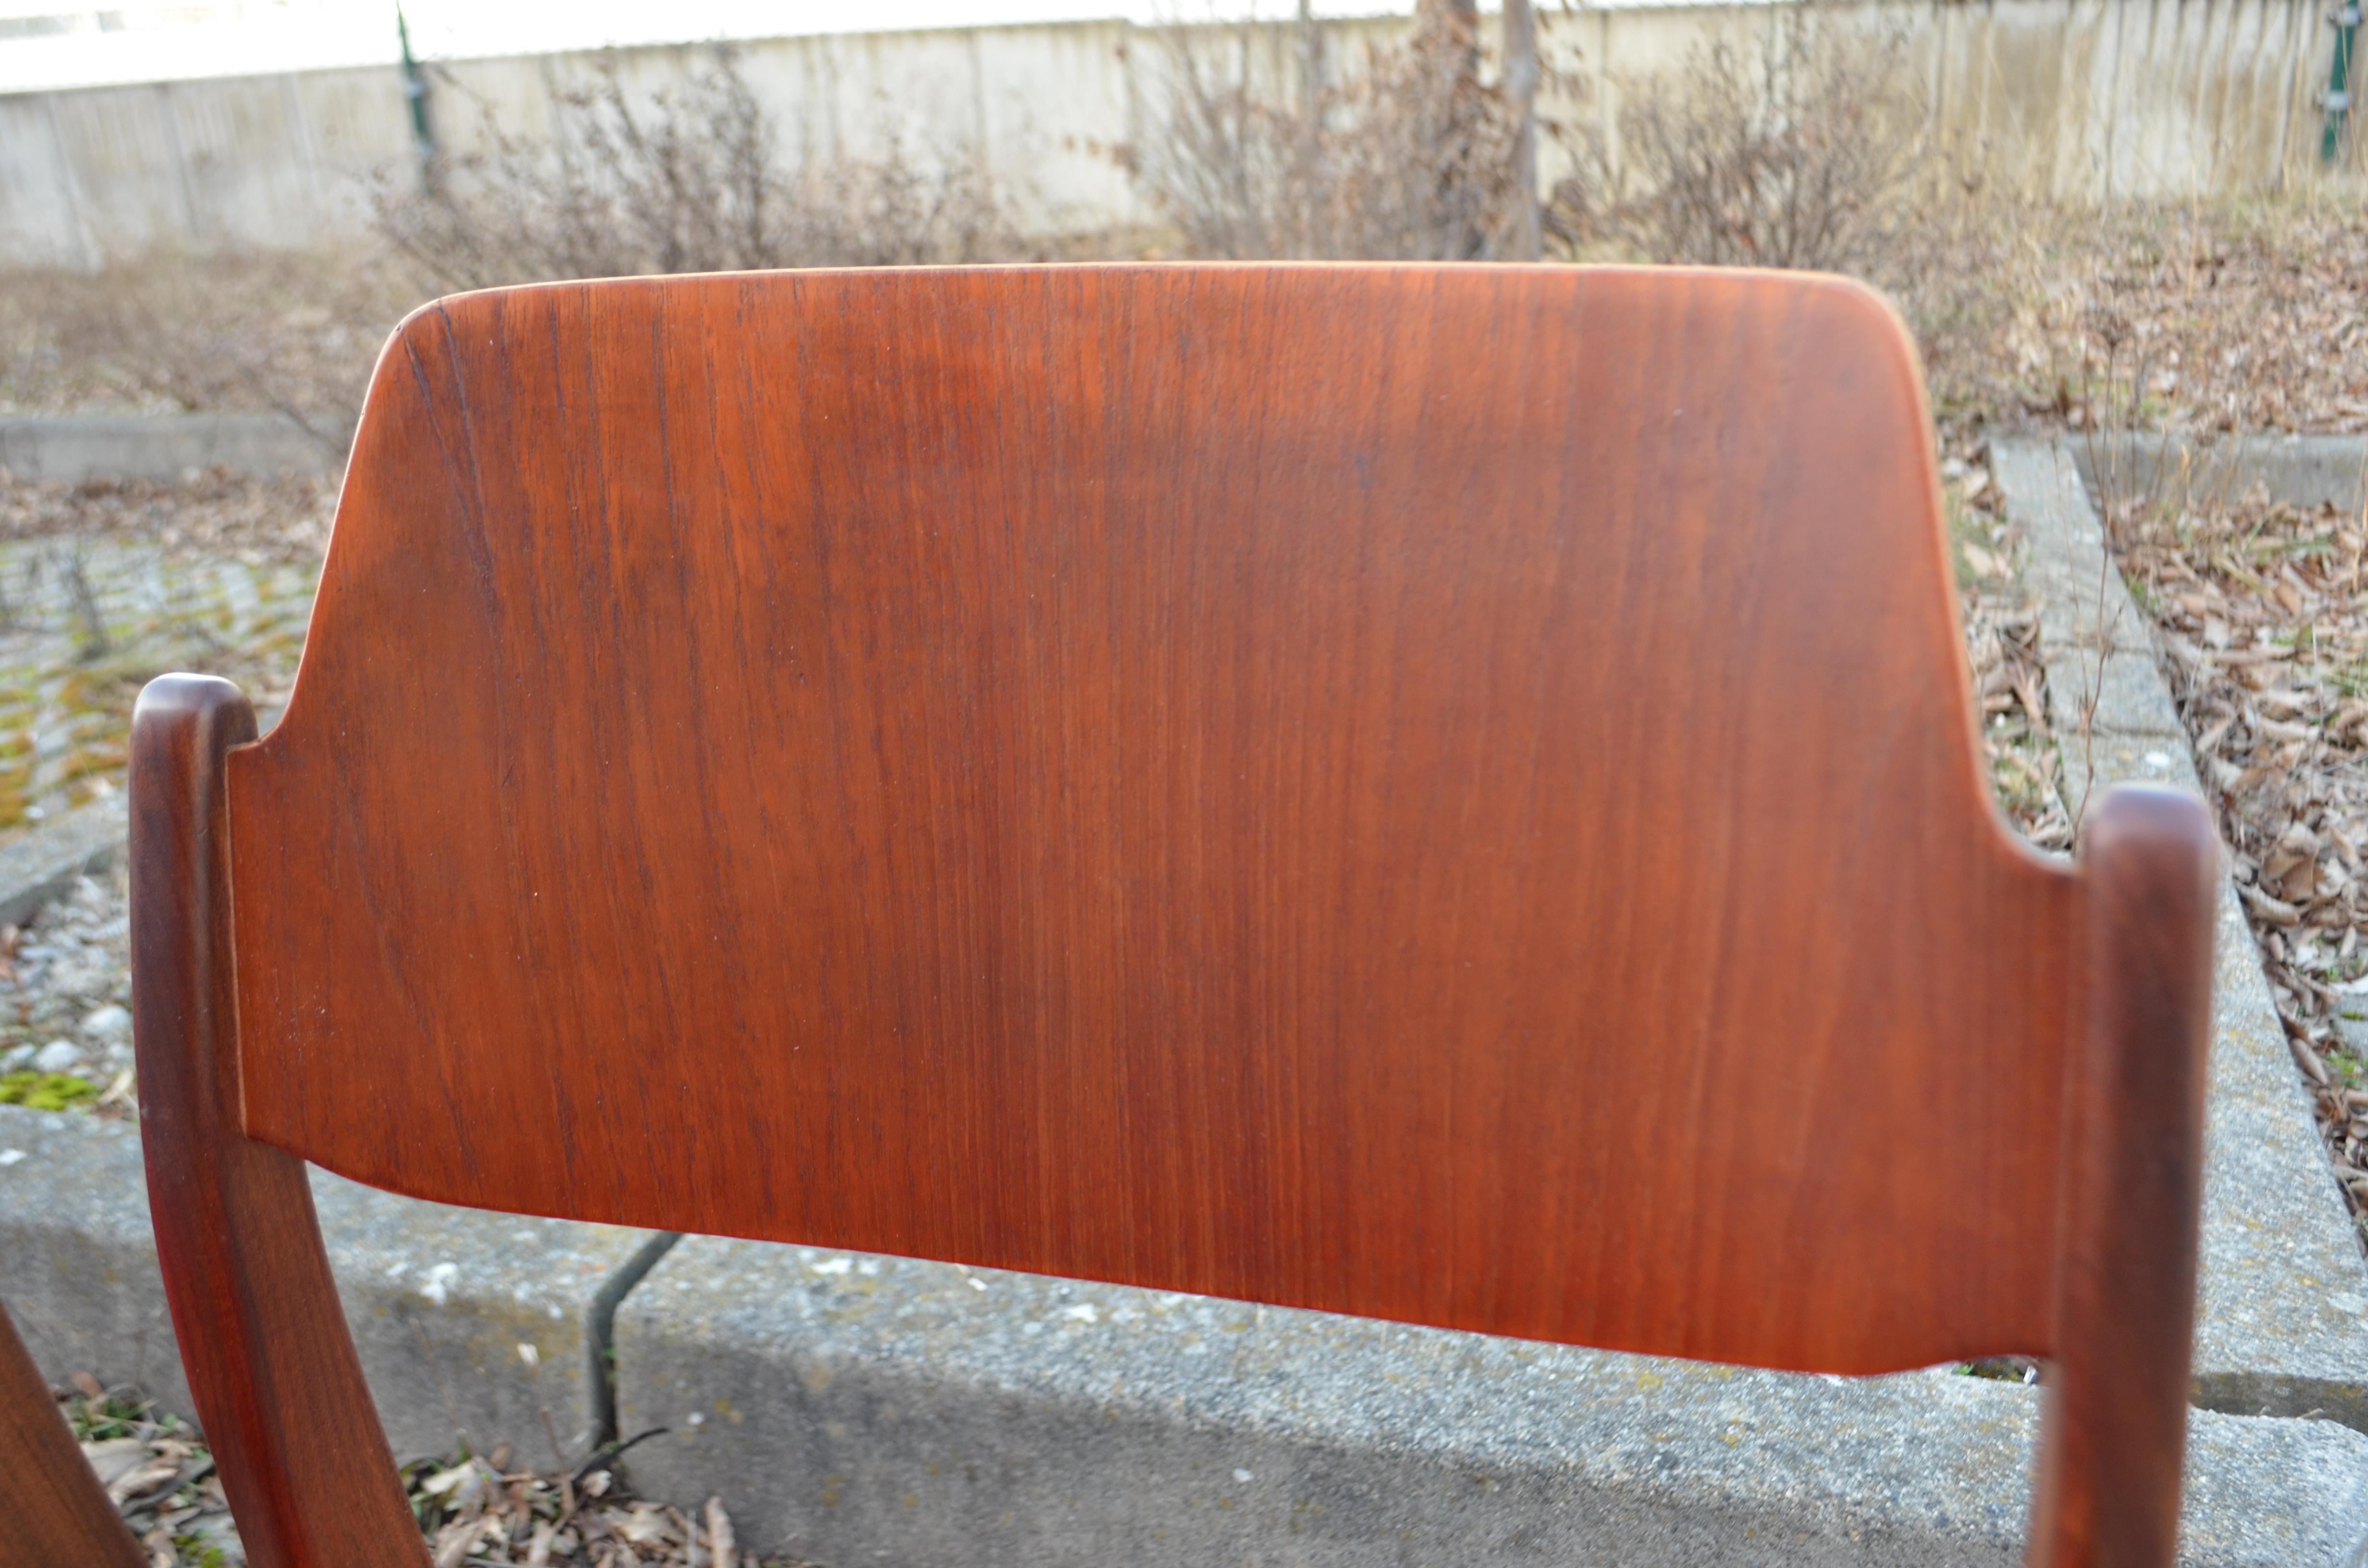 Modernist Wilkhahn Hartmut Lohmeyer Plywood Dining Chair 476A In Good Condition For Sale In Munich, Bavaria